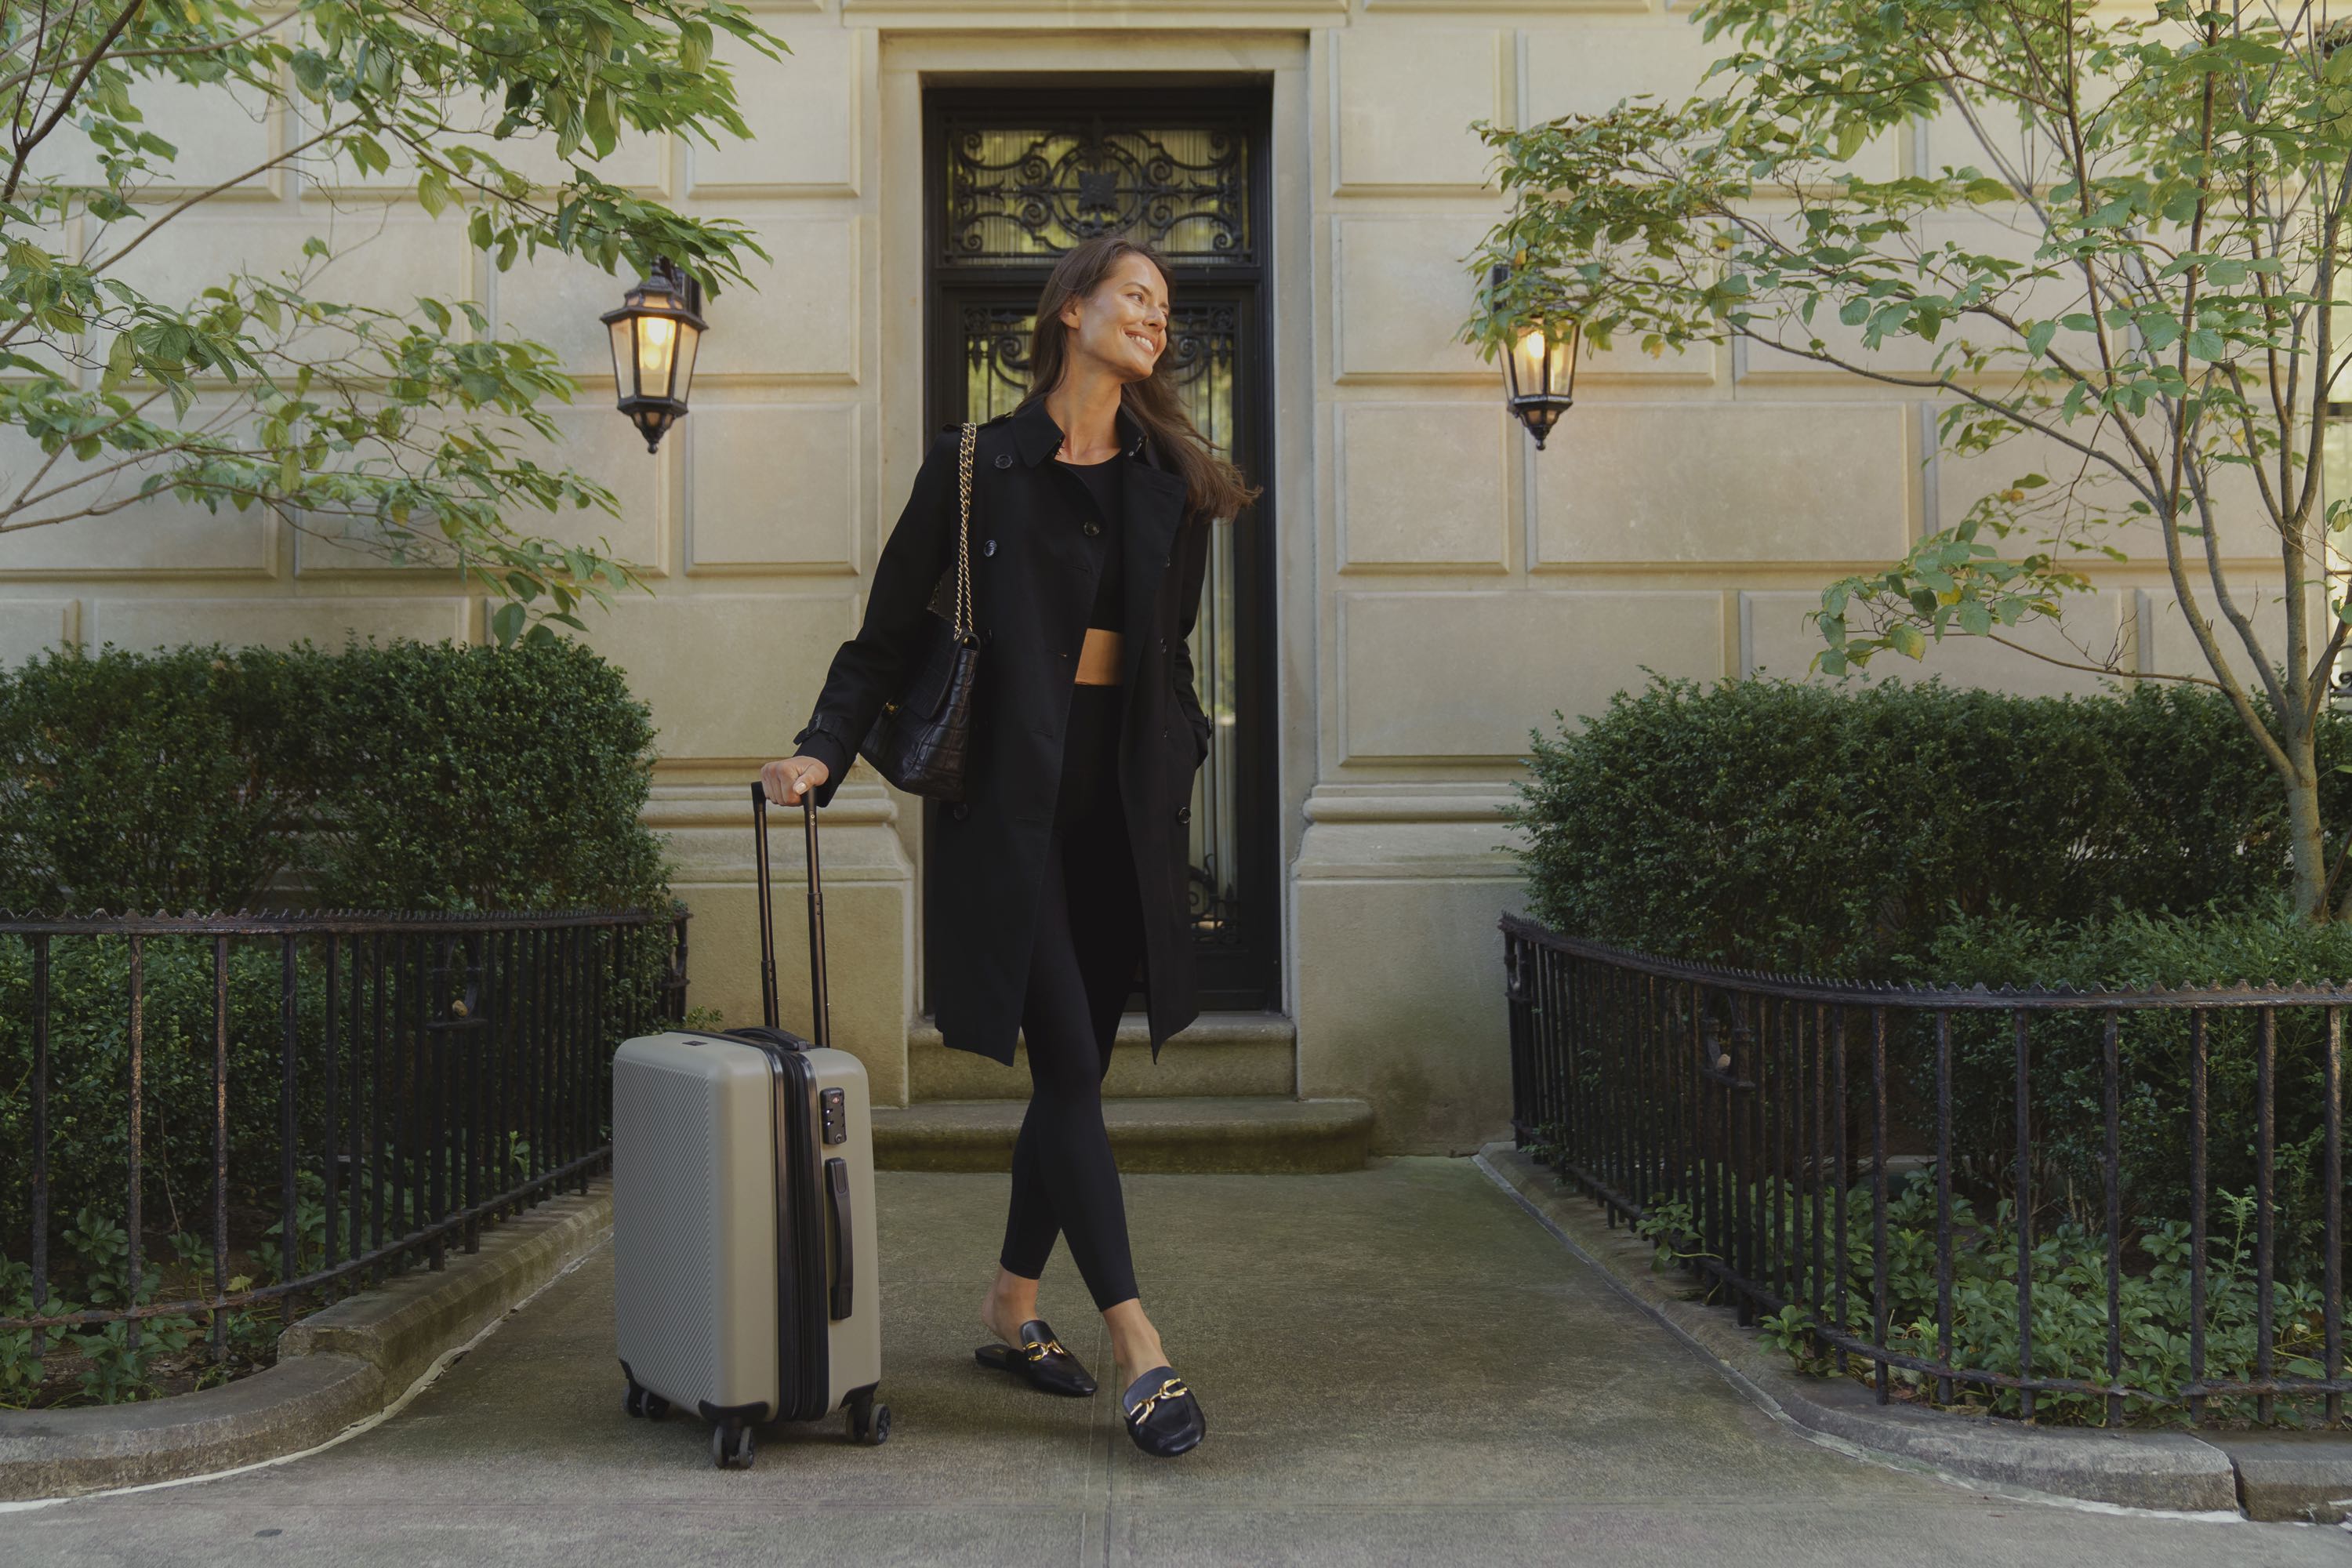 Women leaving town house with suite case for travel wearing black Elastique top and bottom along with trench coat, purse and slides.